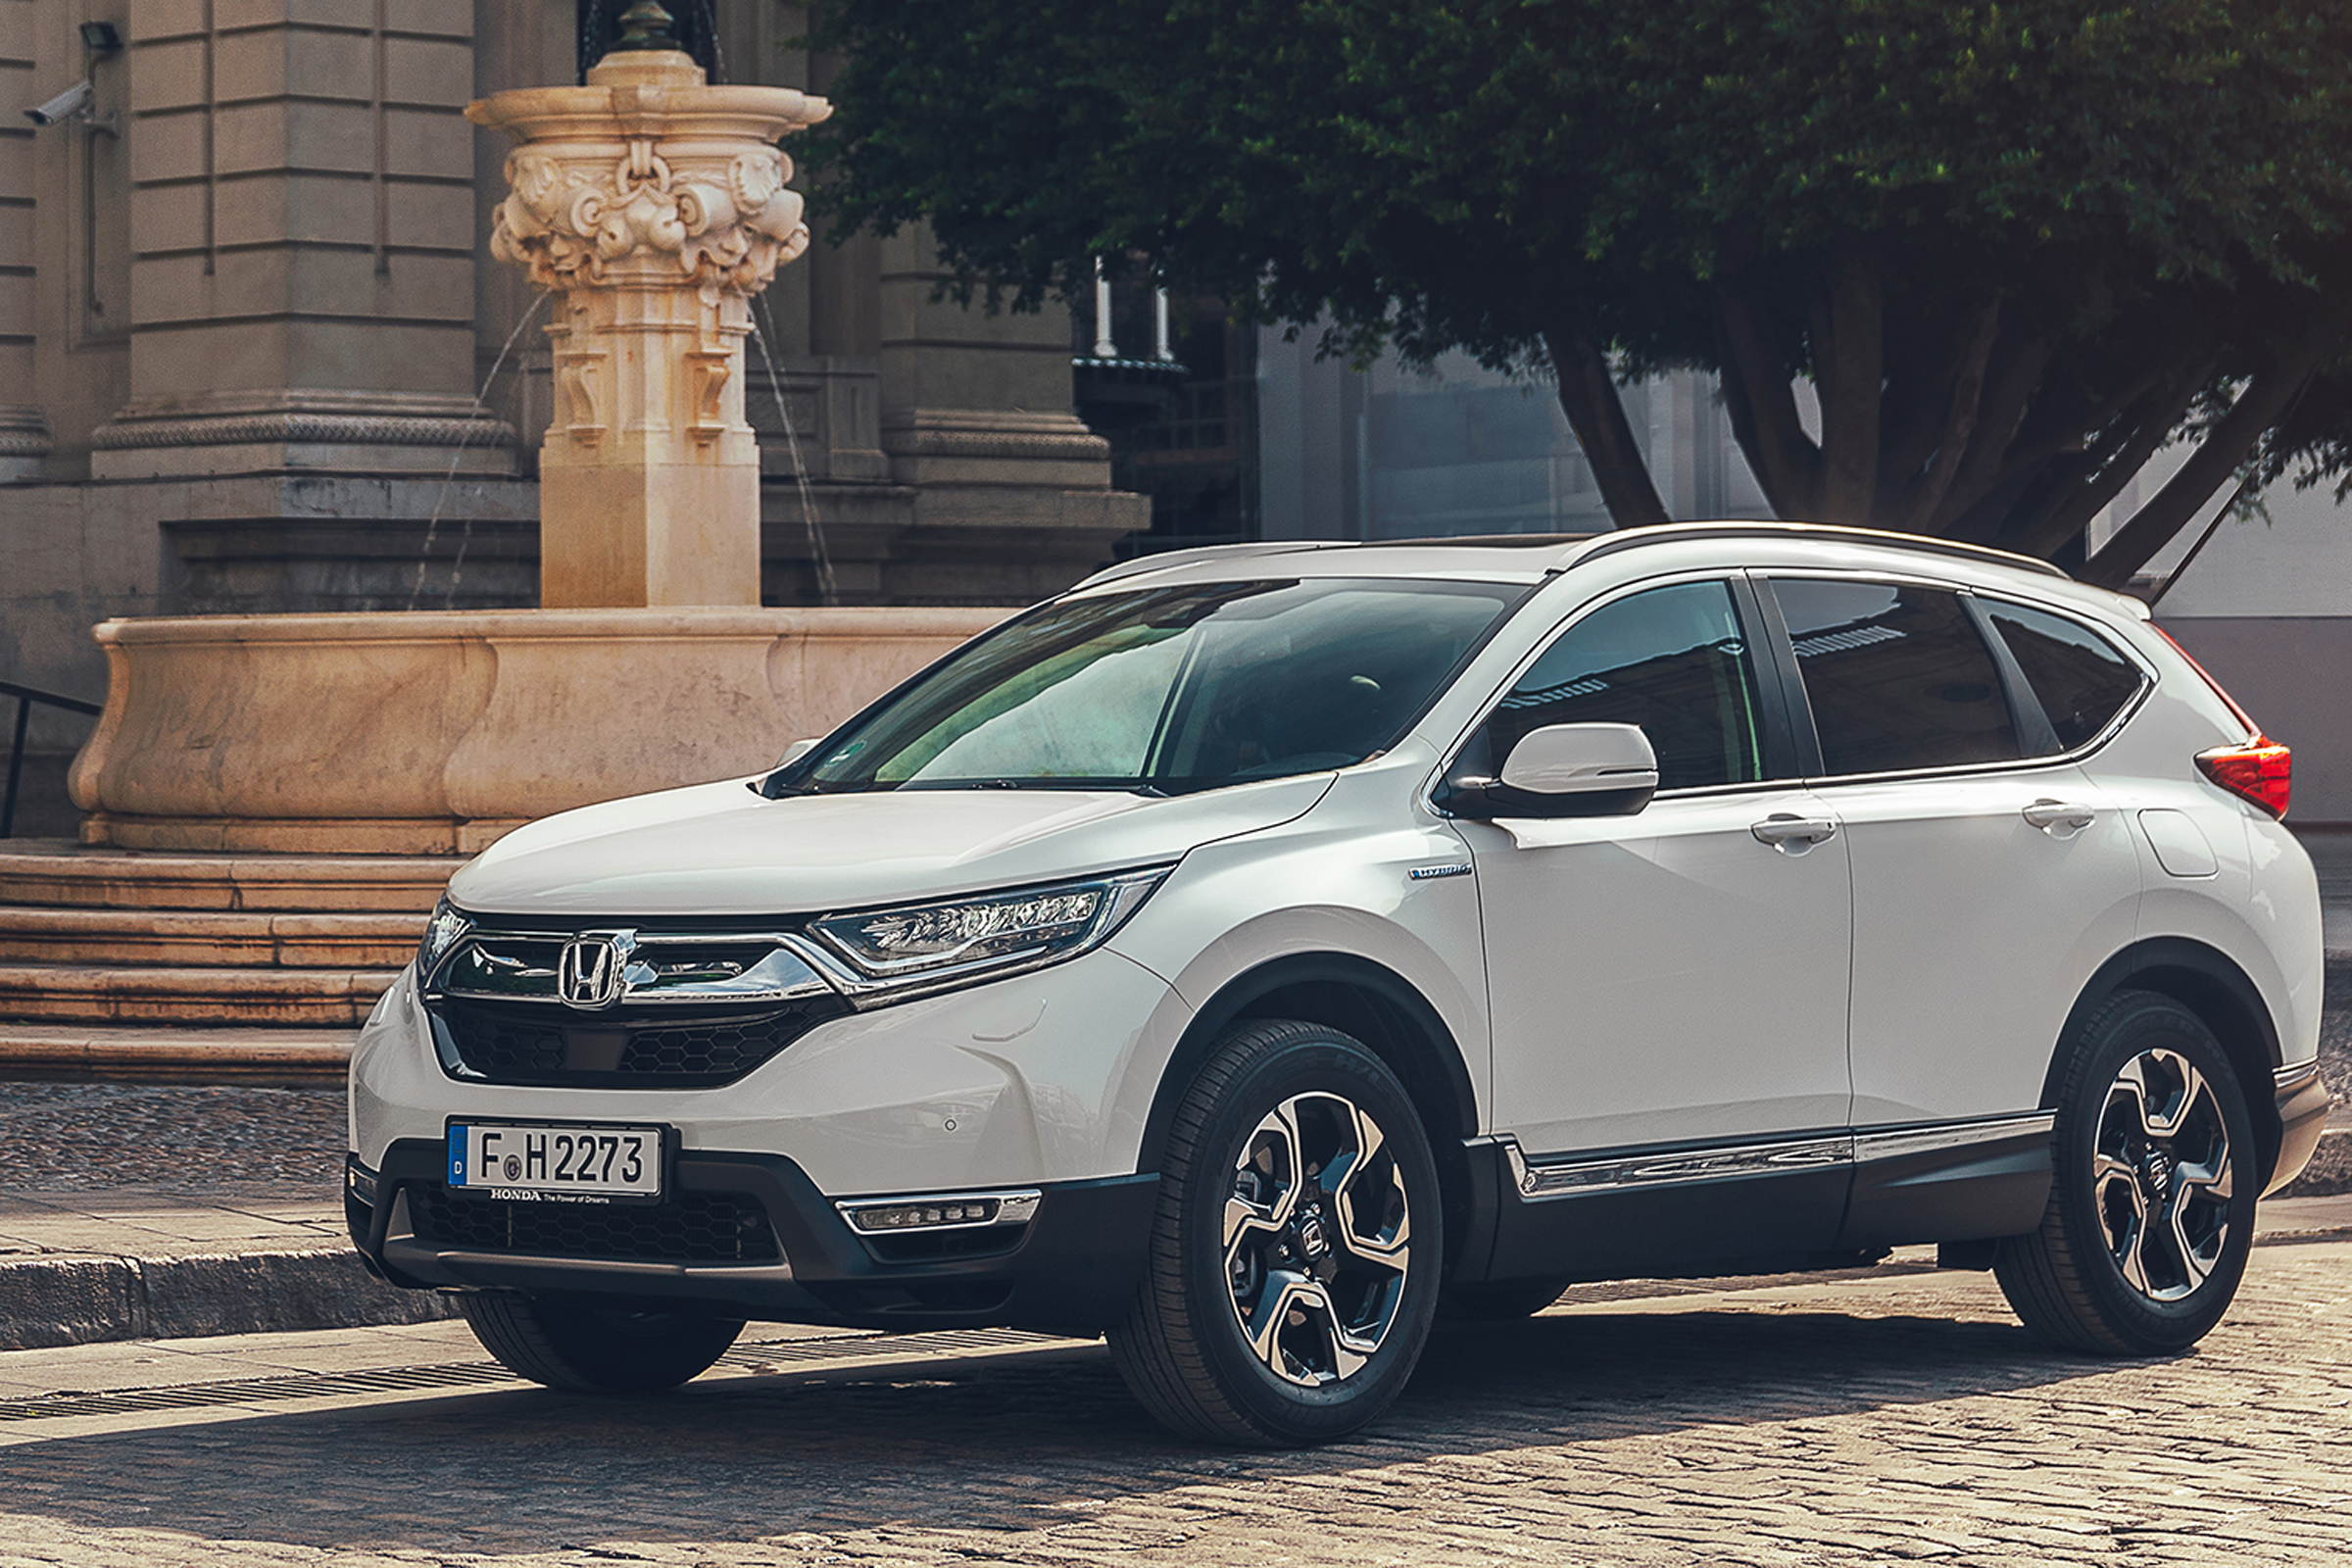 New Honda CRV 2019 prices, specs and release date Carbuyer